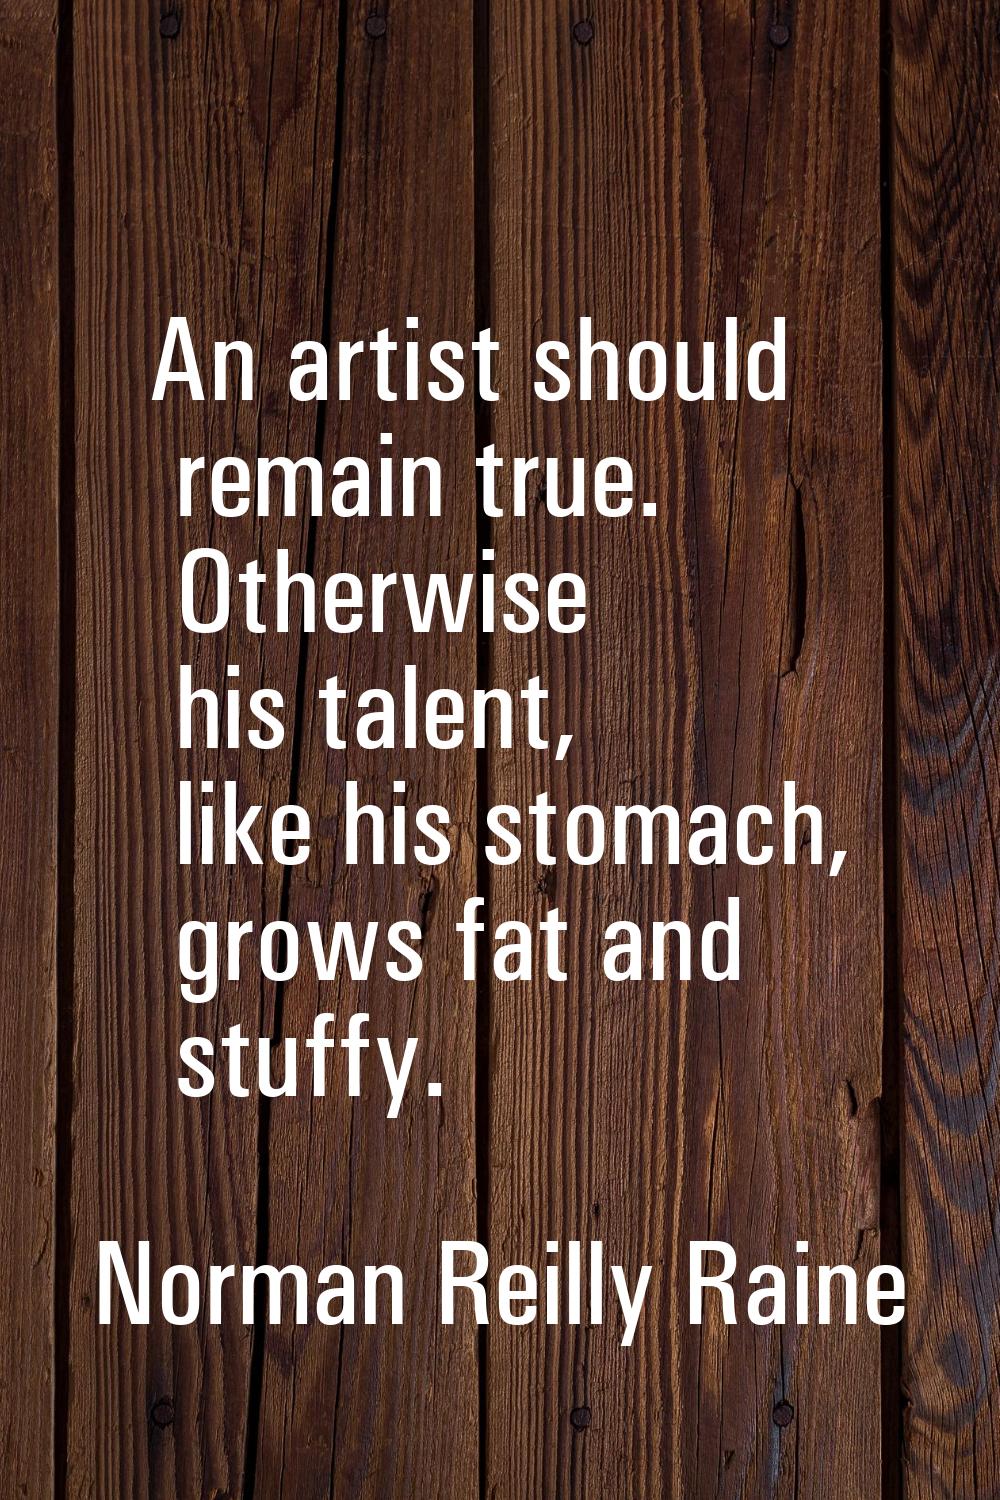 An artist should remain true. Otherwise his talent, like his stomach, grows fat and stuffy.